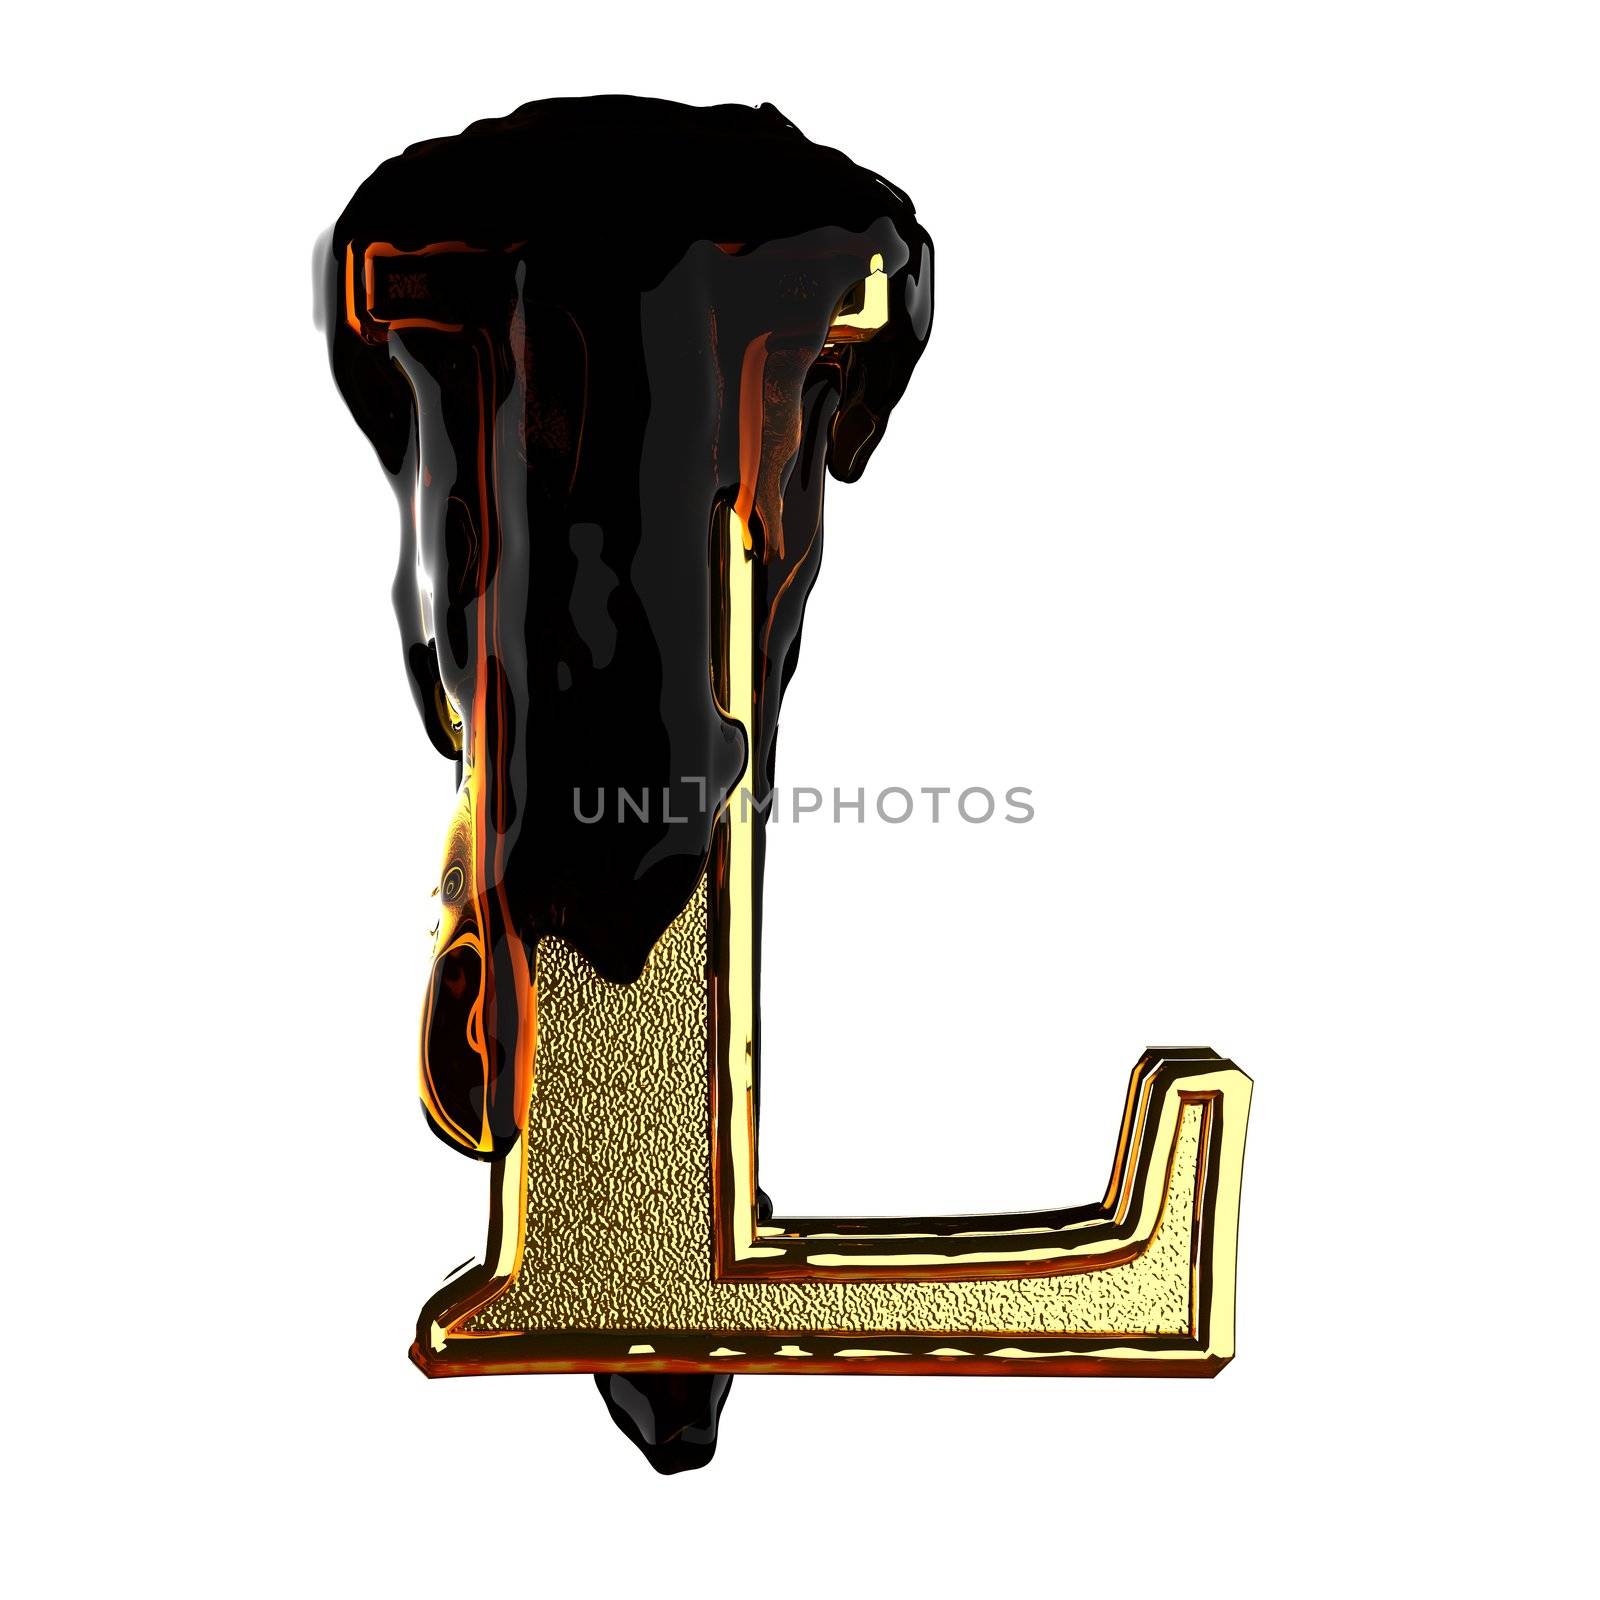 Golden figure with oil made in 3D